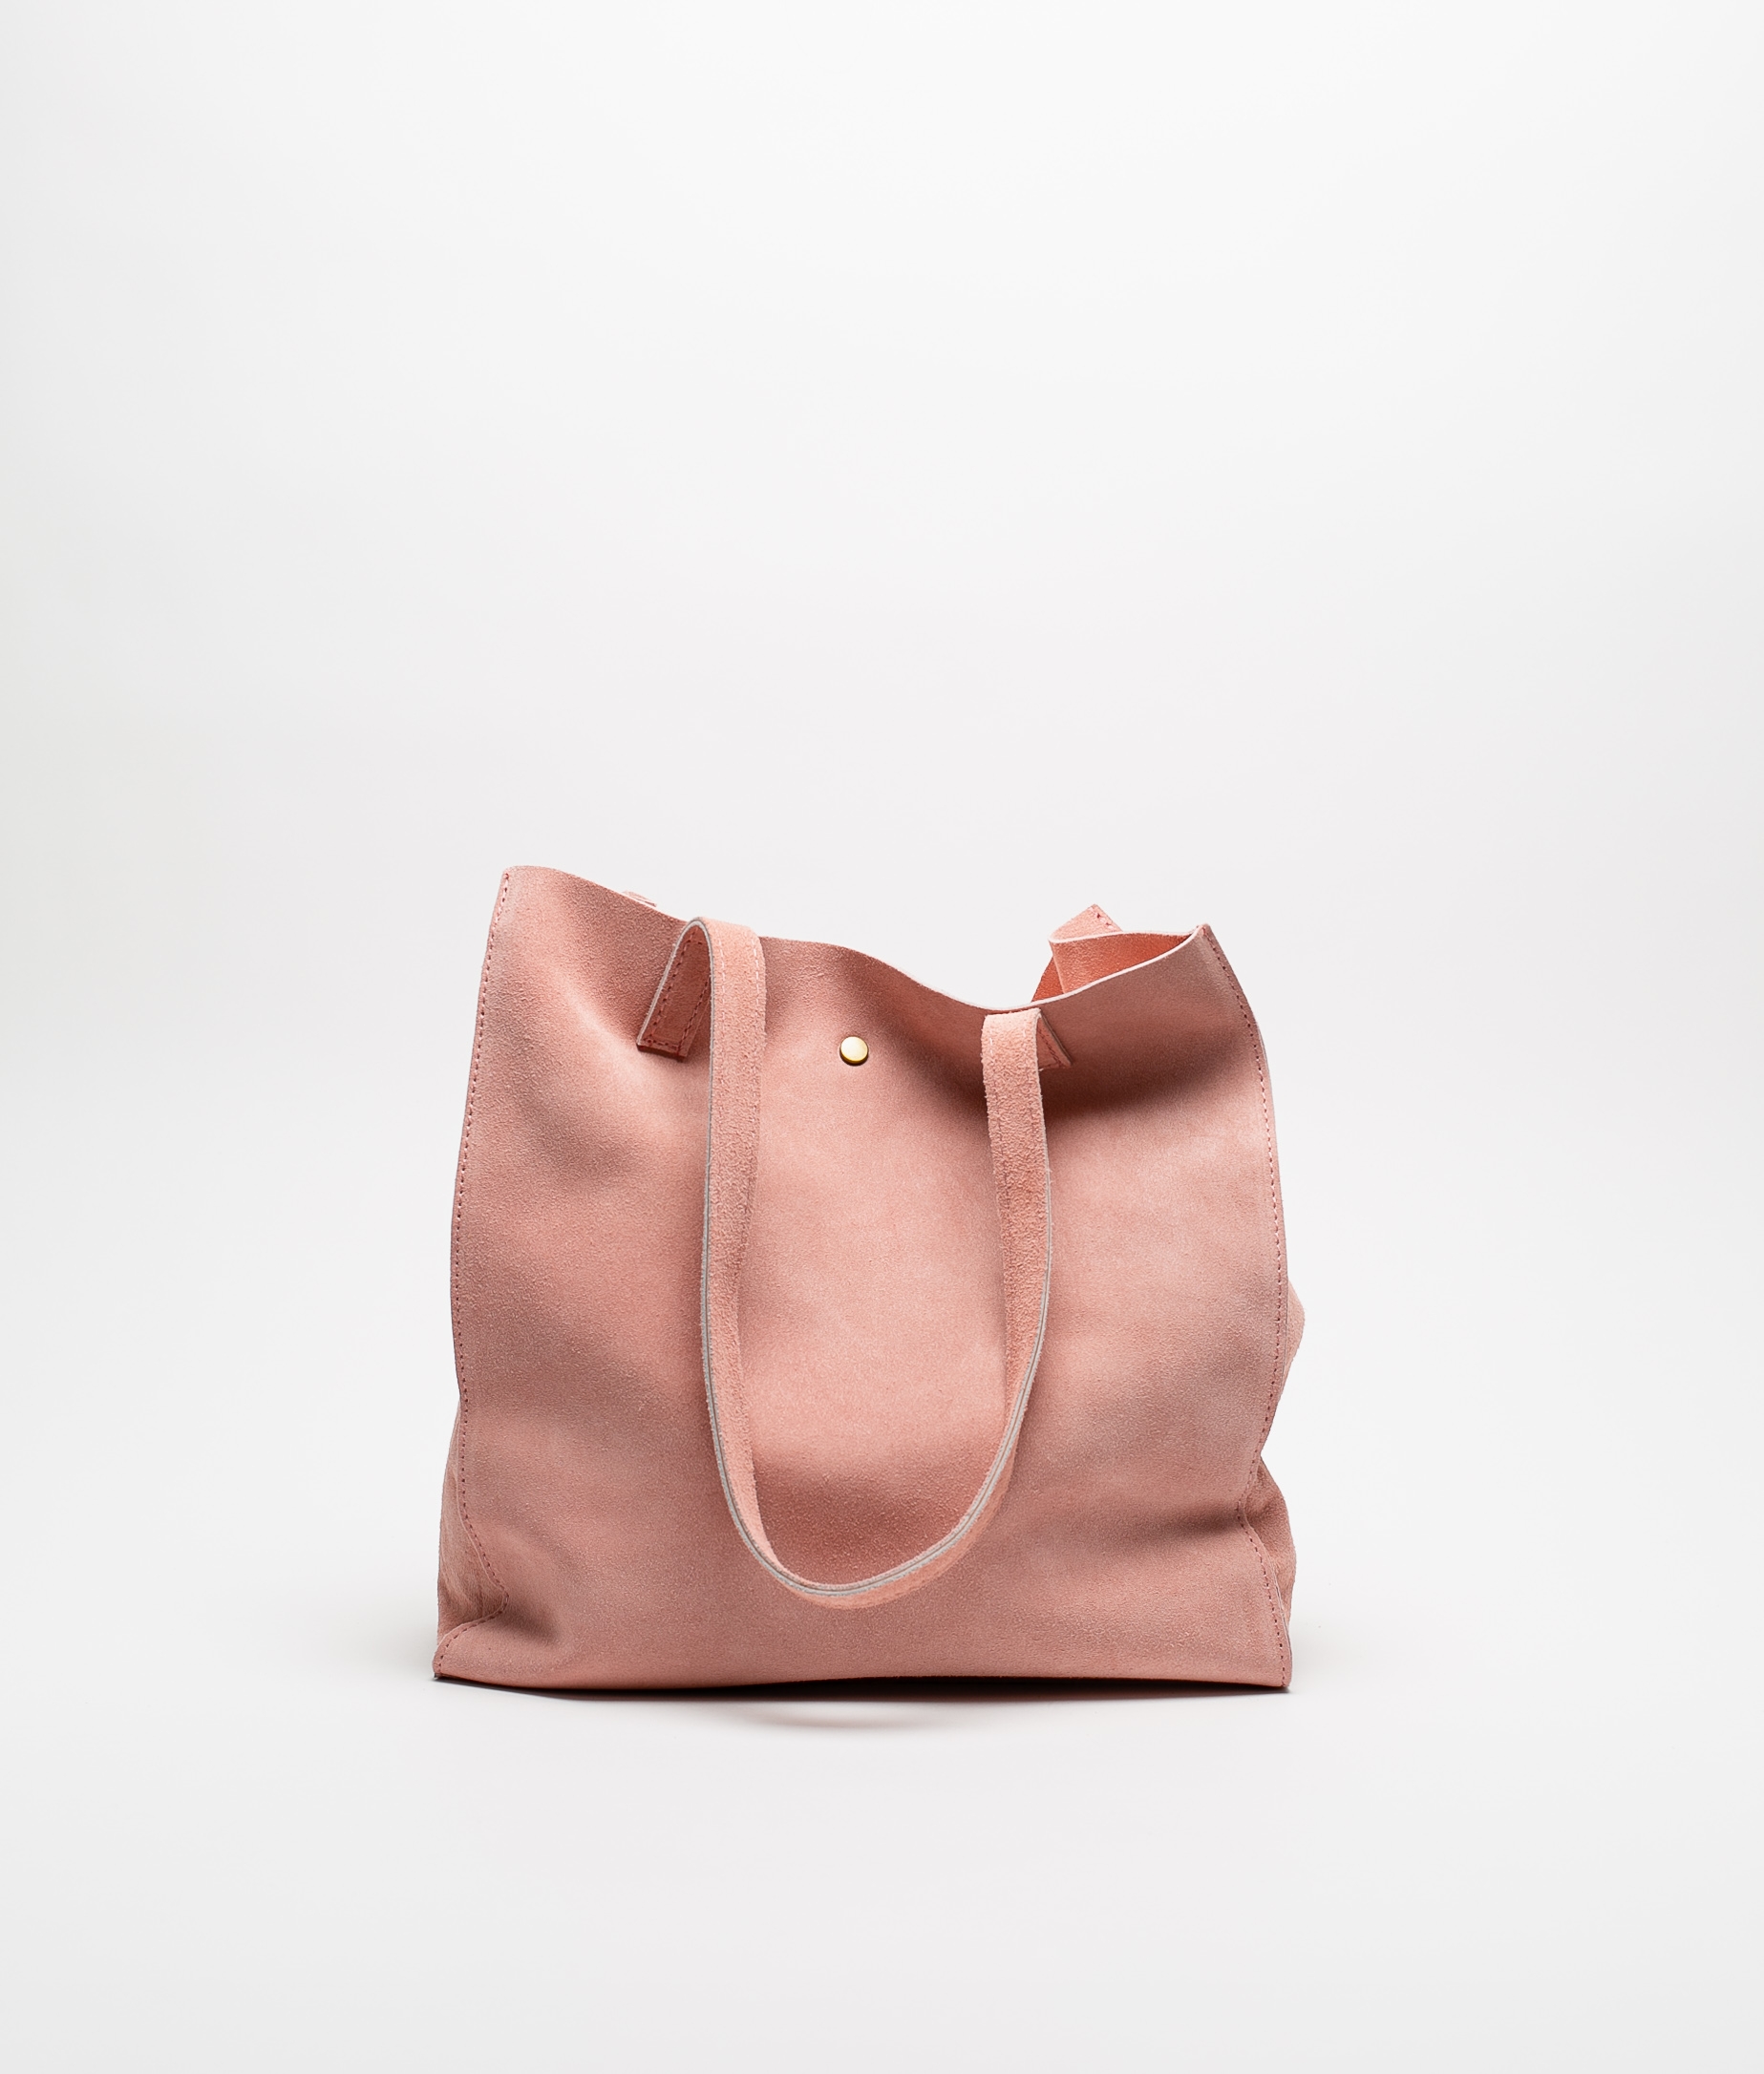 MYKO BAGS - LEATHER